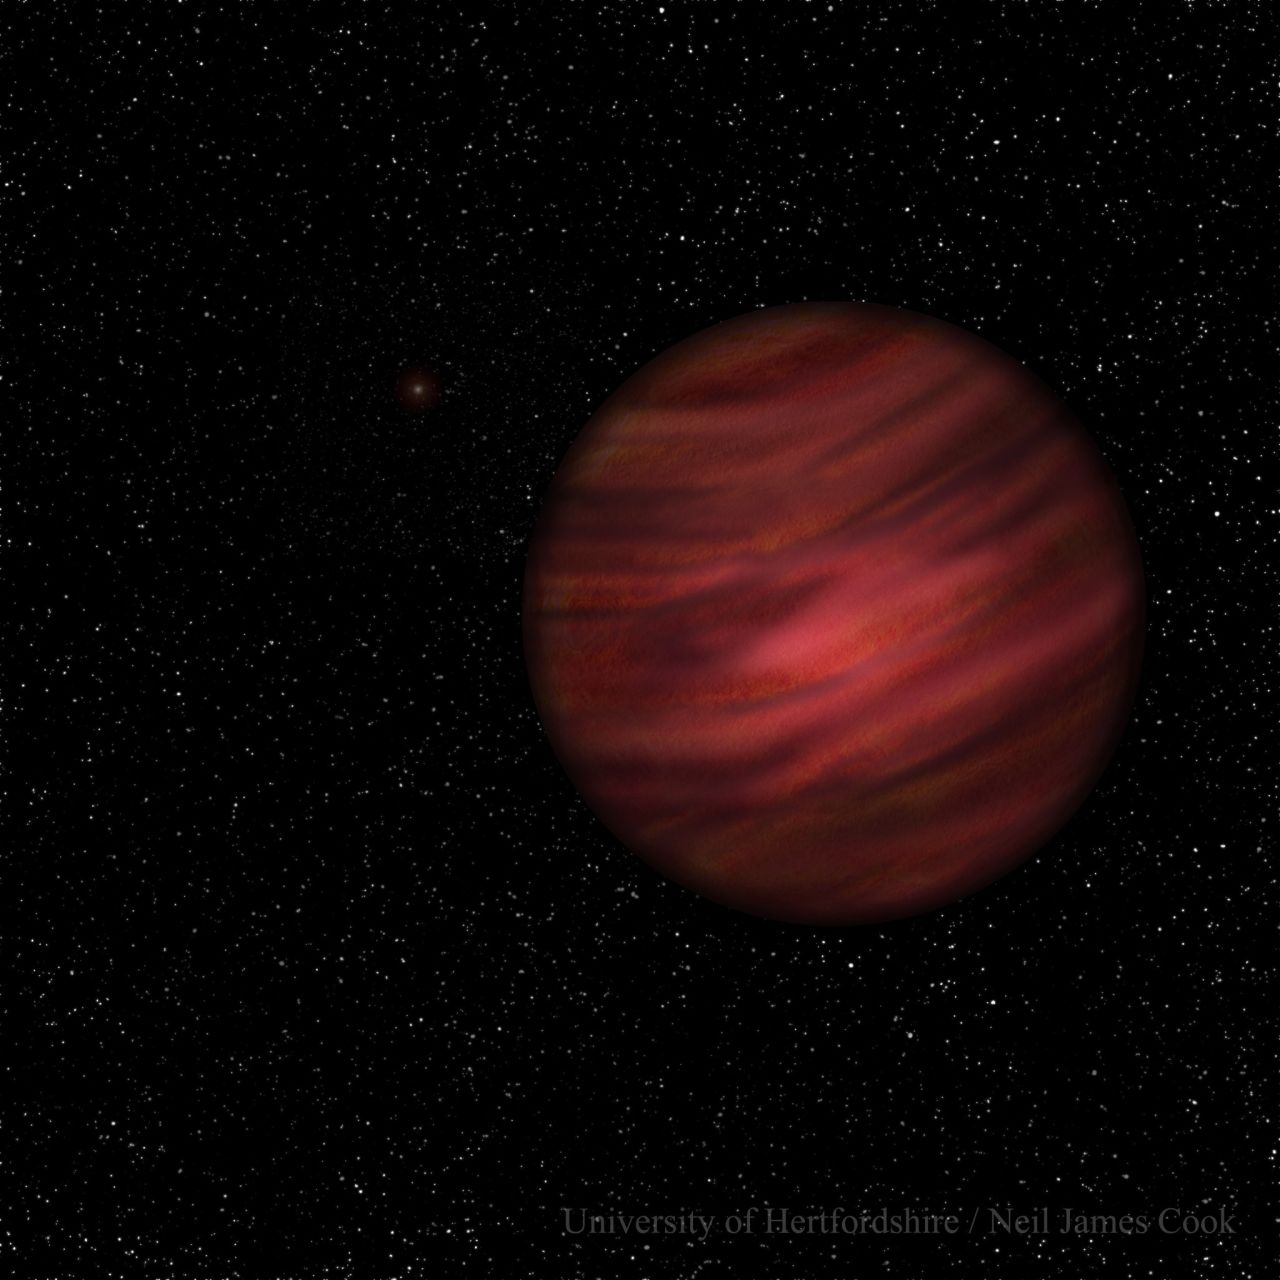 An artist's impression of 2MASS J2126, which takens 900,000 years to orbit its star, 1 trillion kilometers away. 